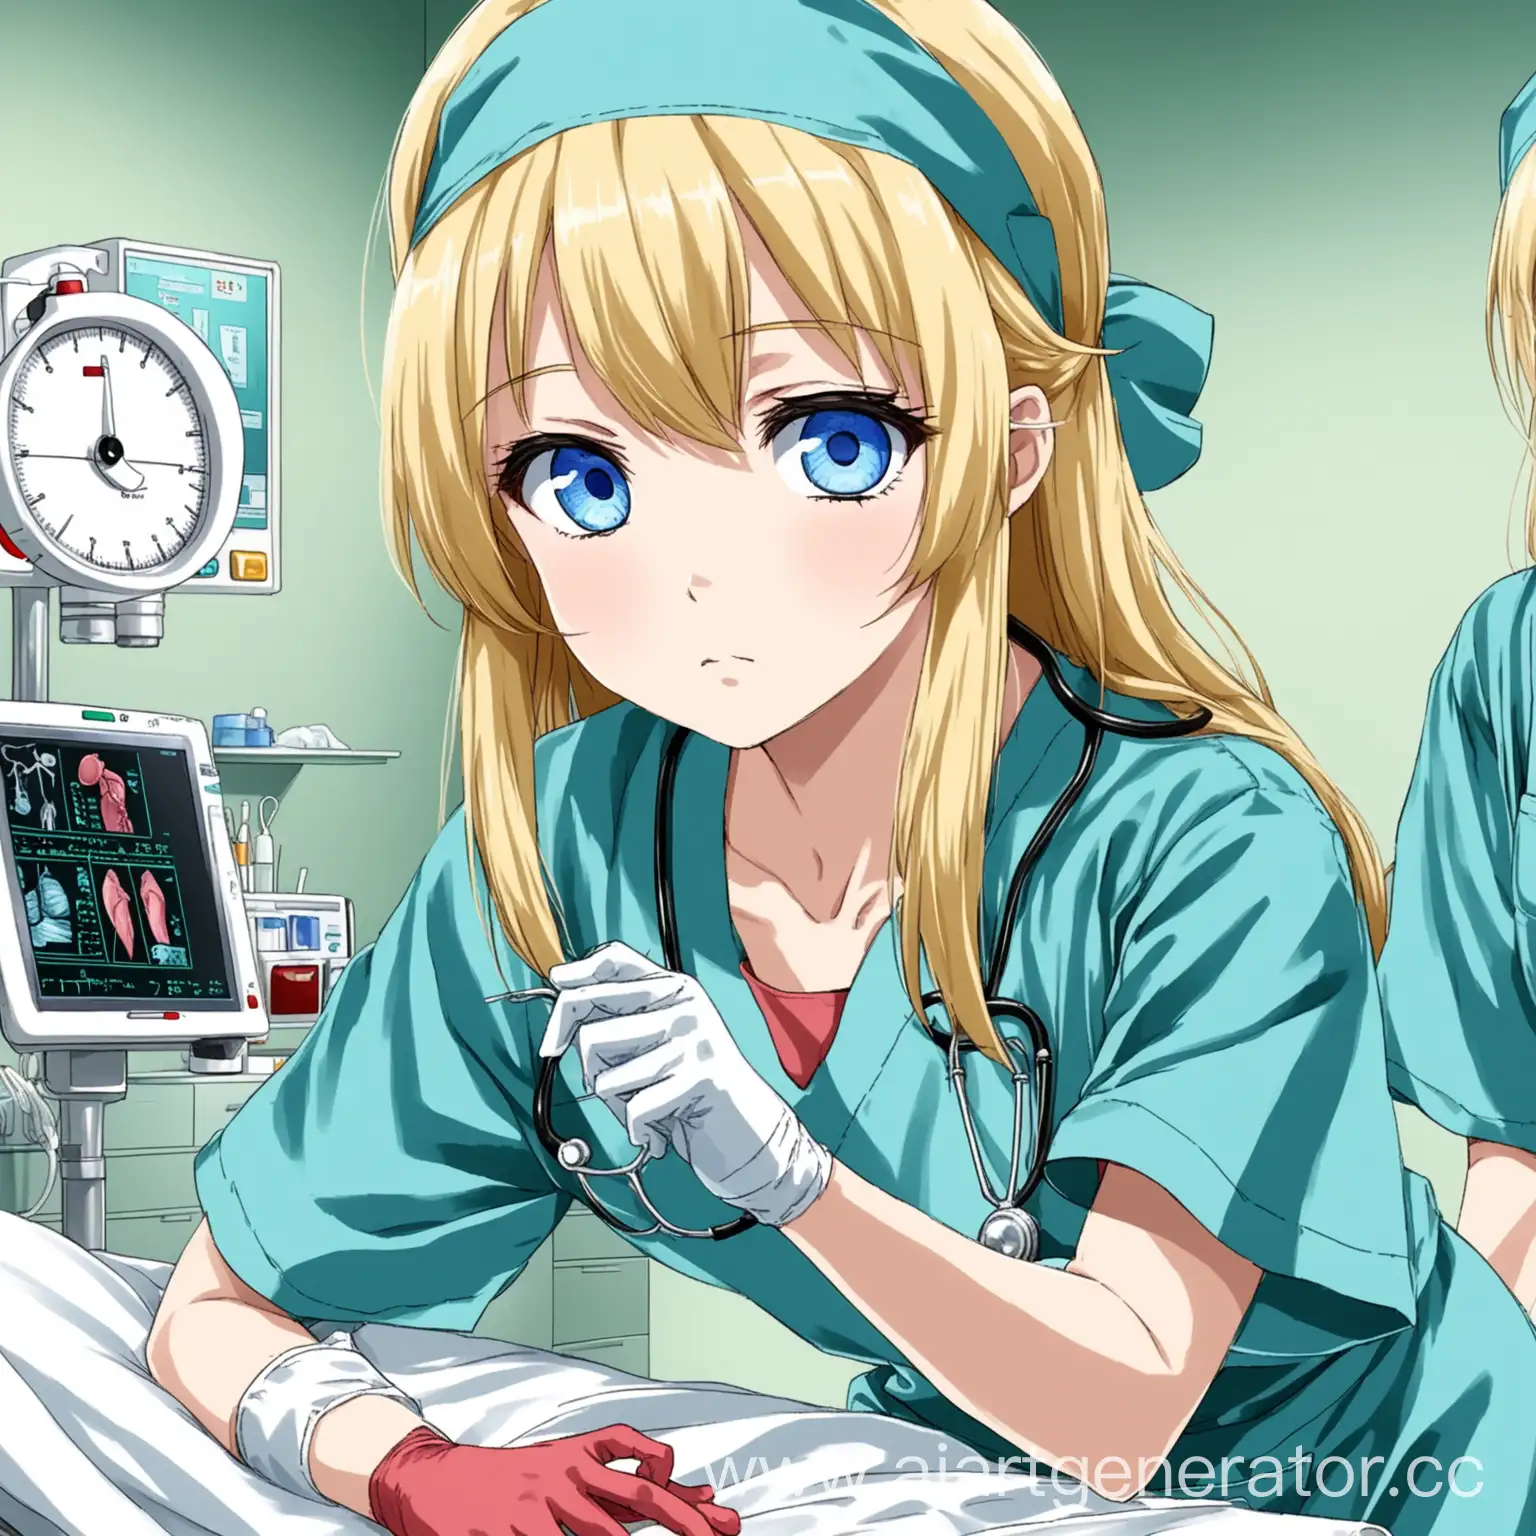 BlondeHaired-BlueEyed-Anime-Surgeons-Daily-Routine